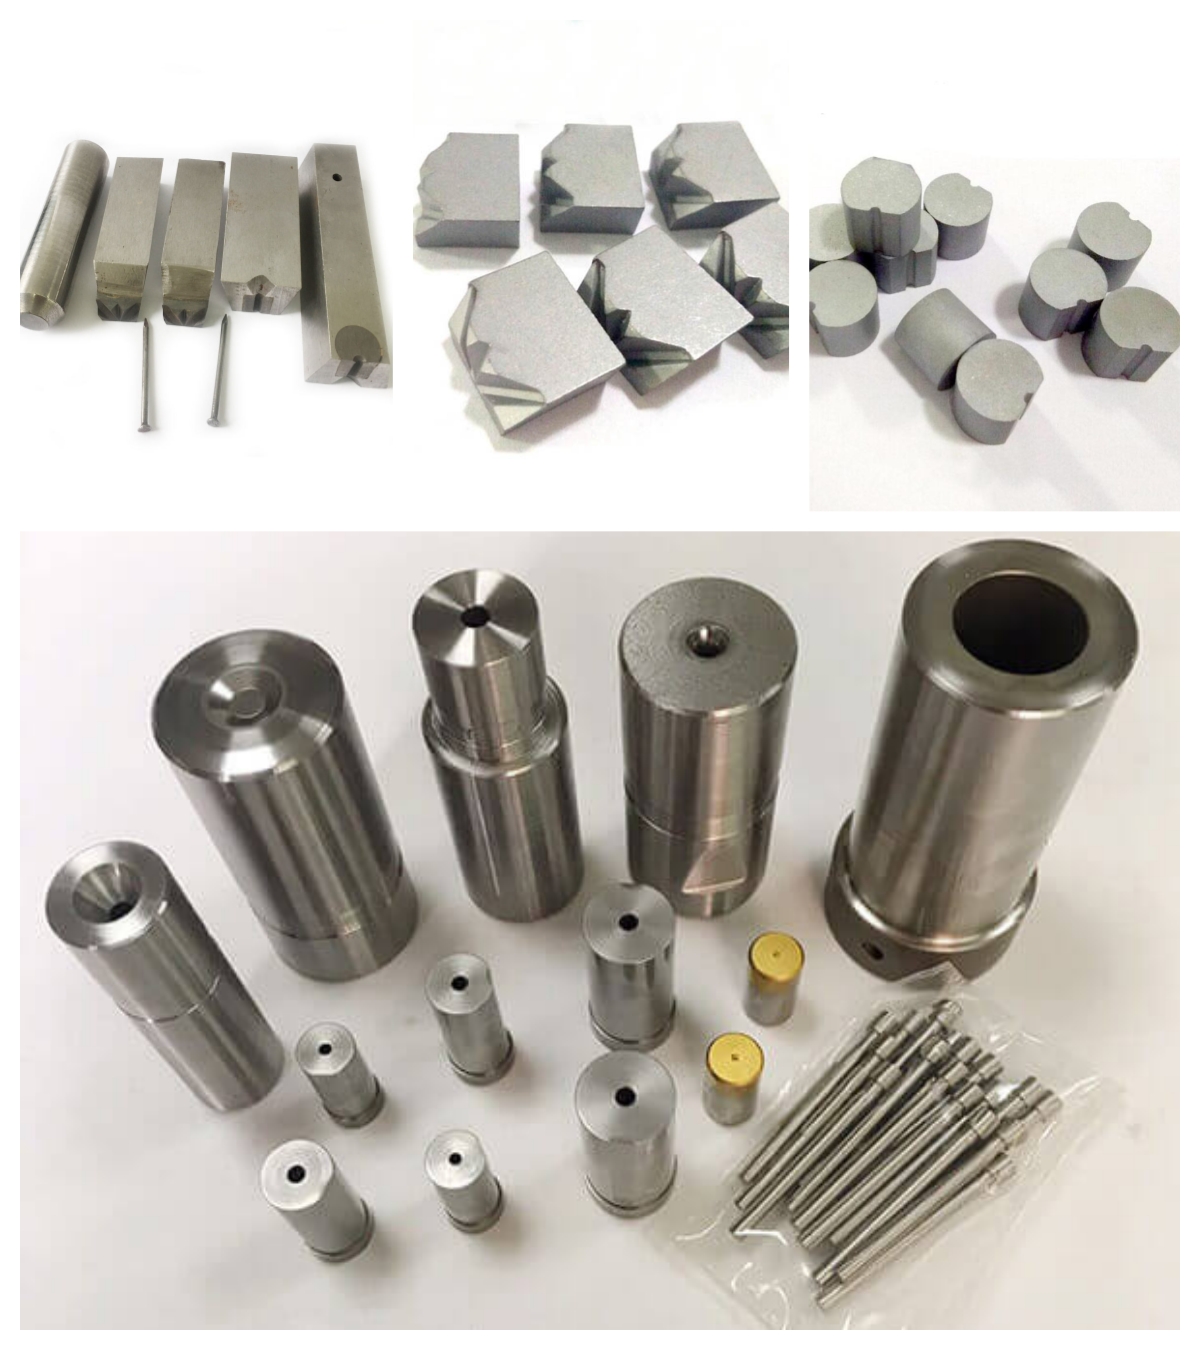 The role of tungsten carbide nail dies in industry